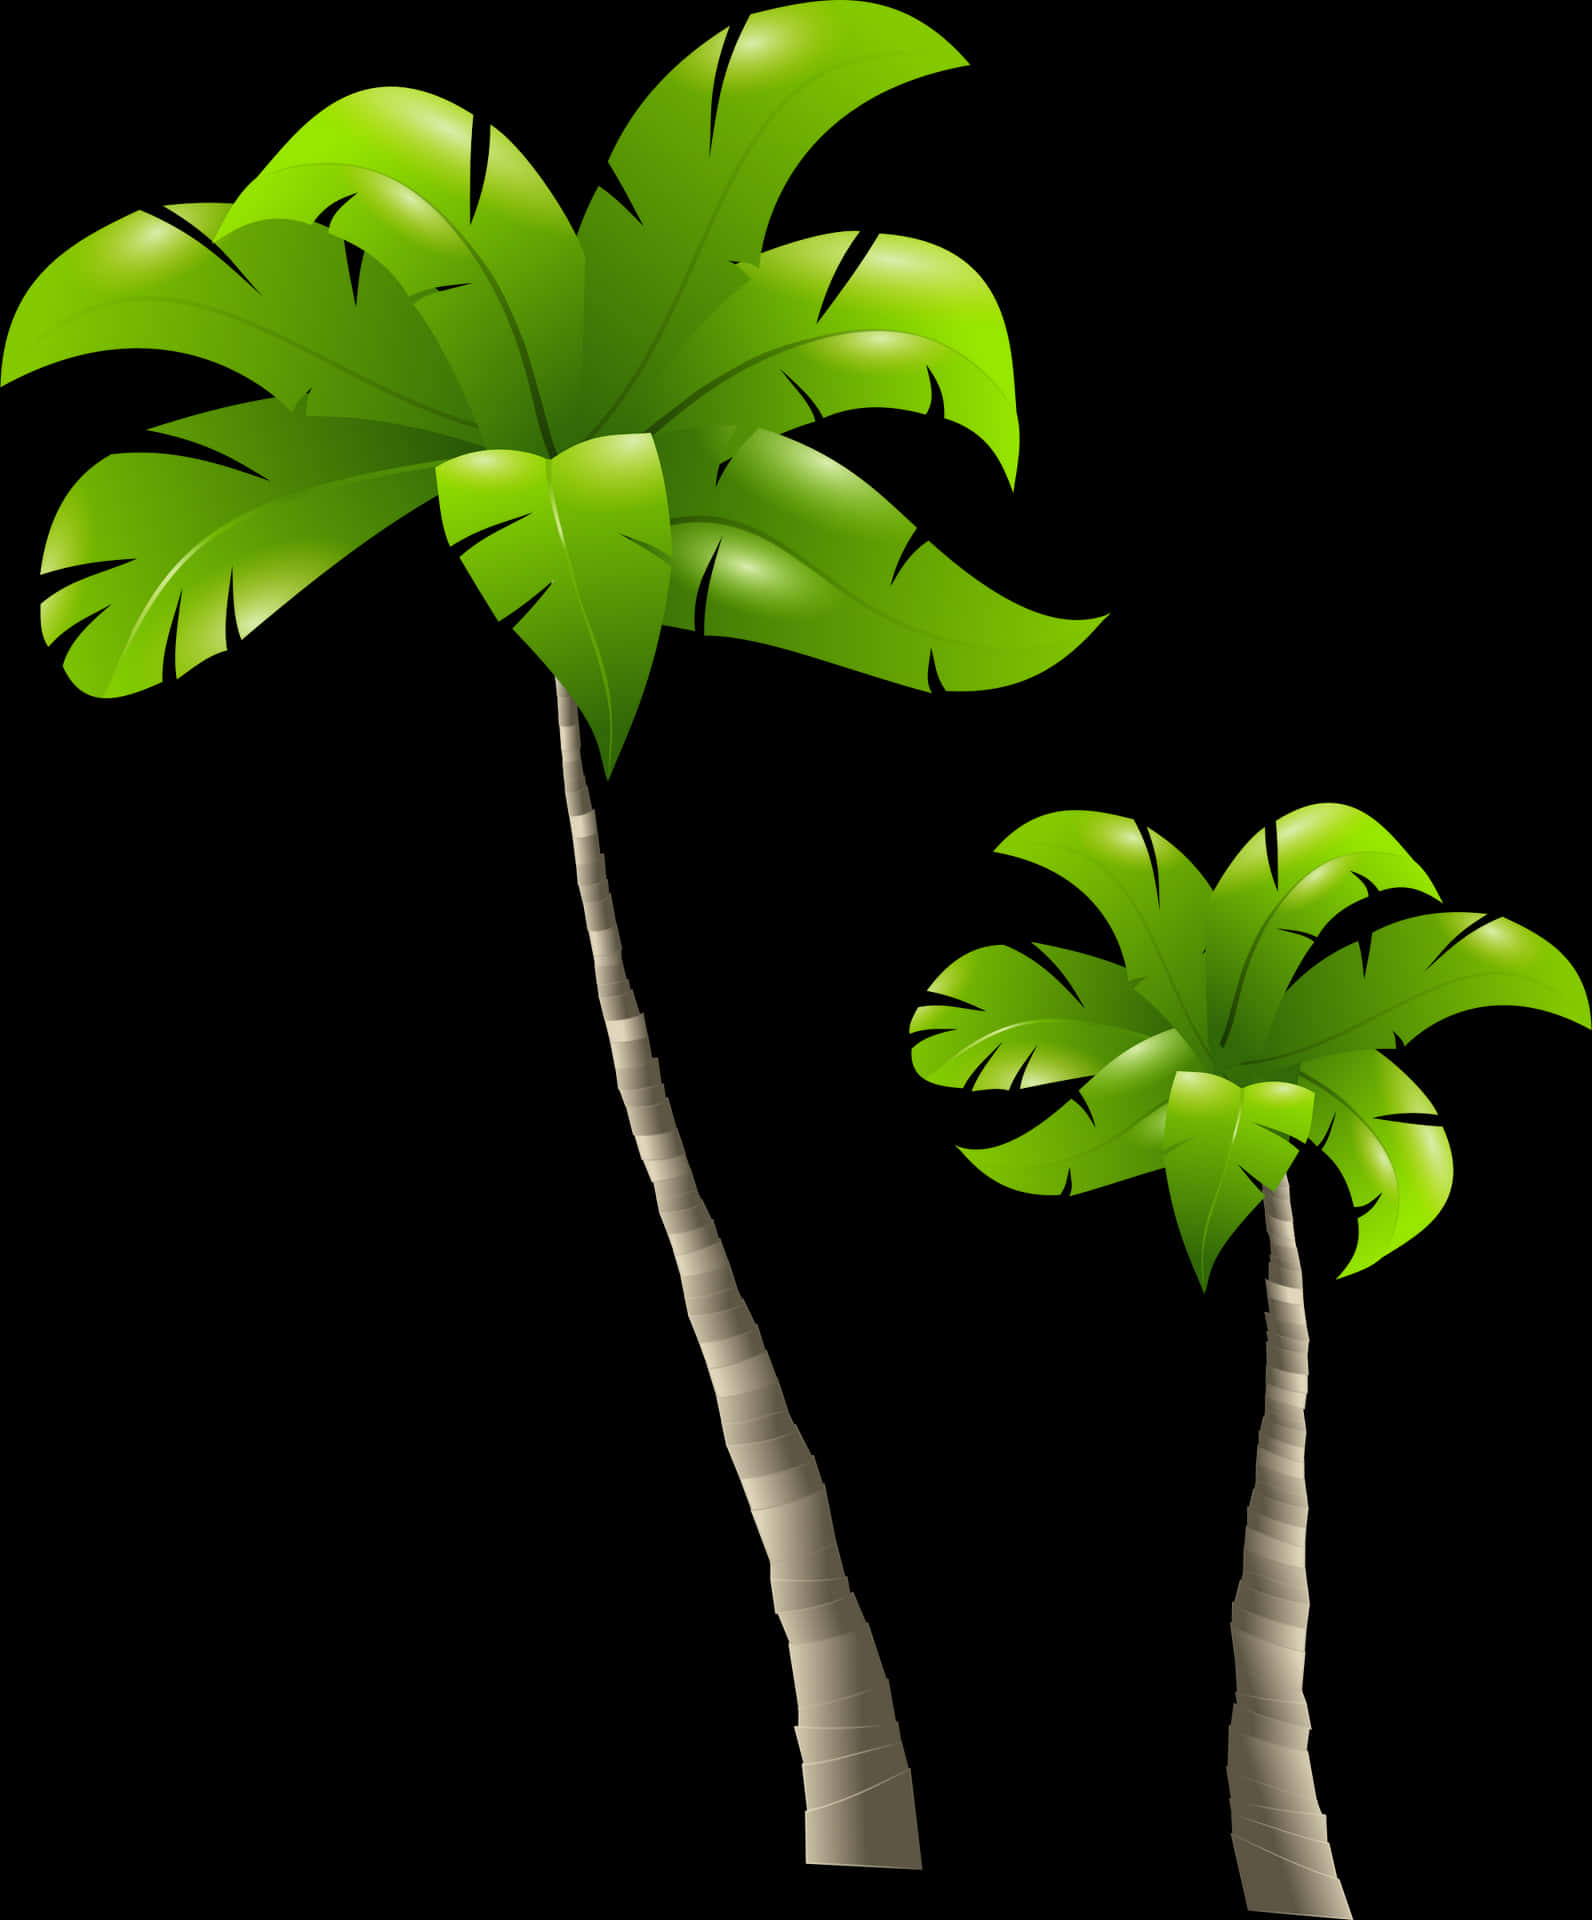 Tropical Palm Trees Illustration PNG image